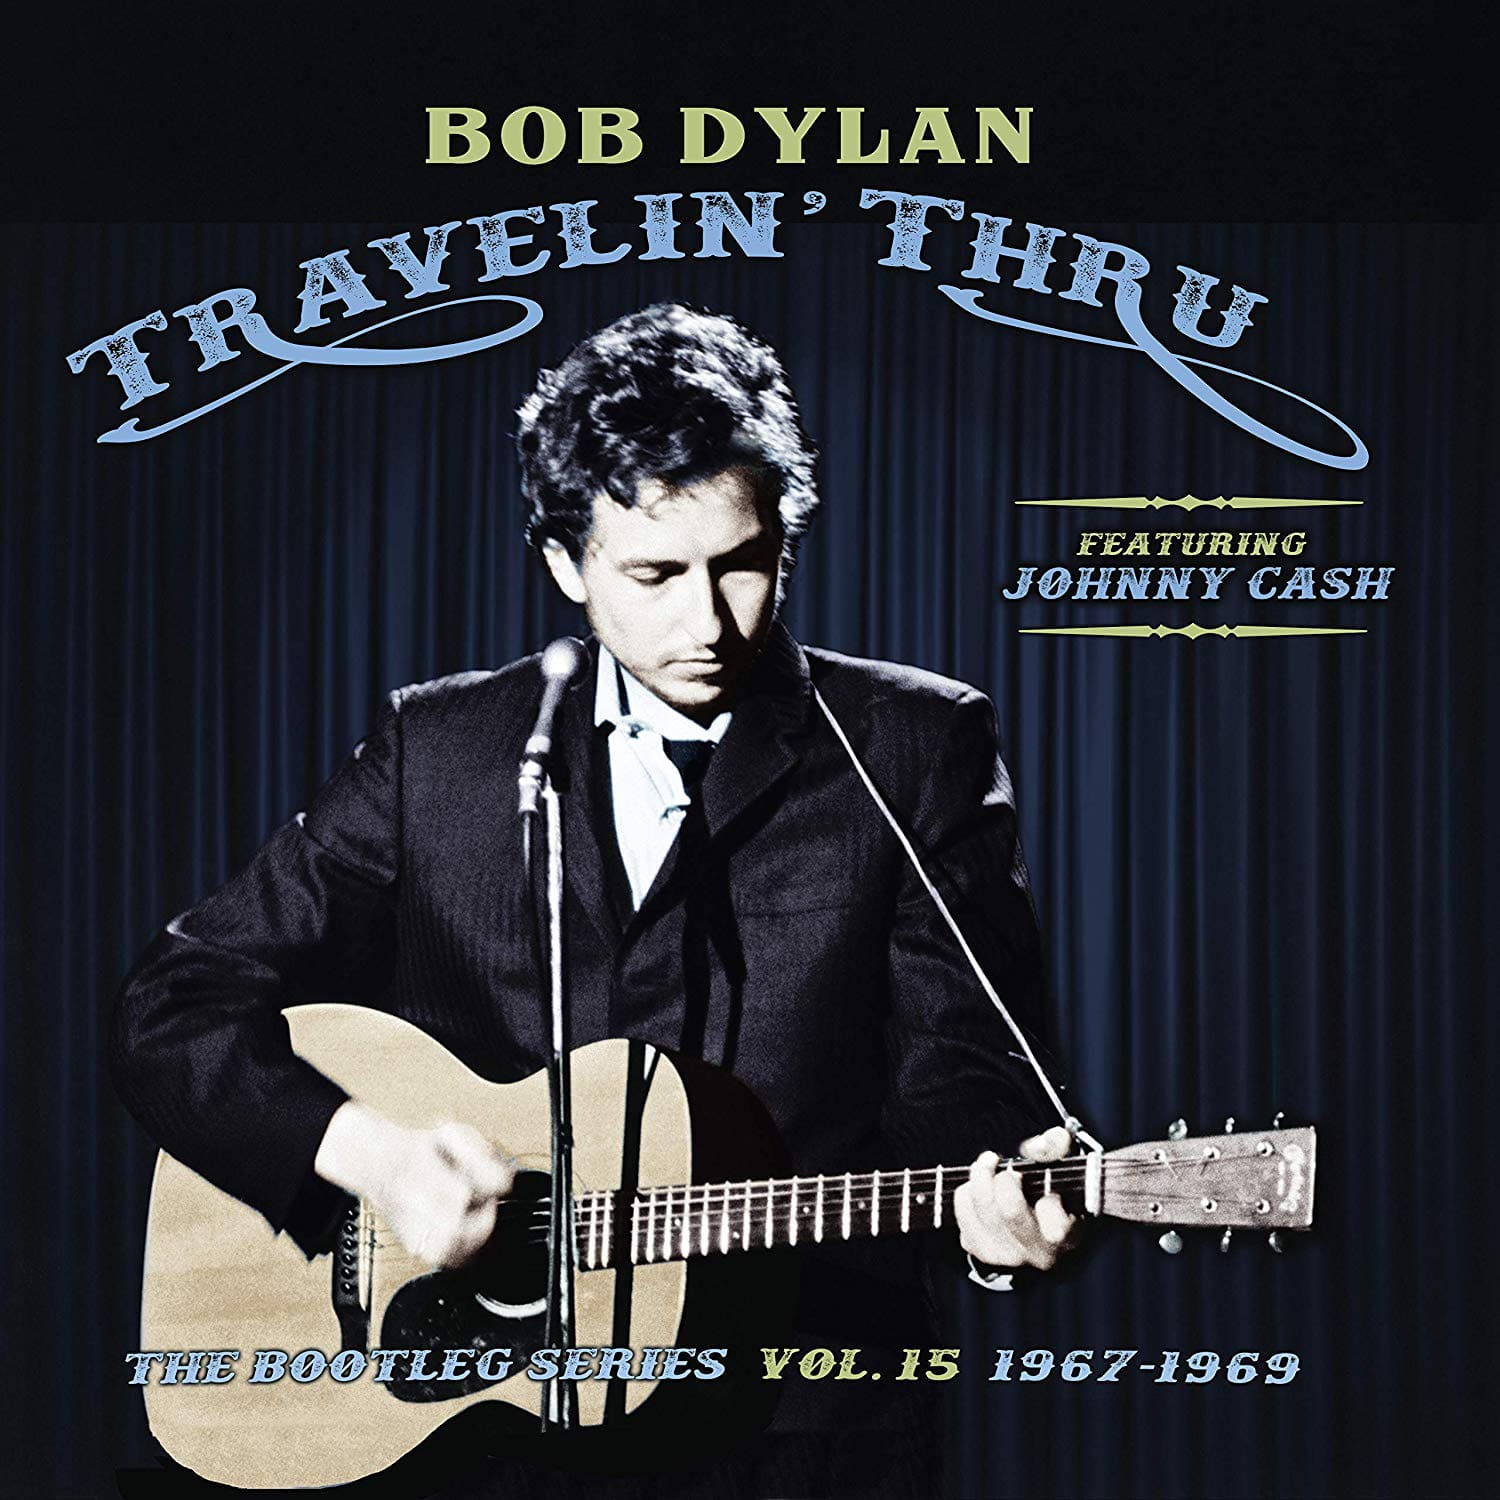 Unheard Bob Dylan and Johnny Cash Recordings To Be Released For Bootleg Series